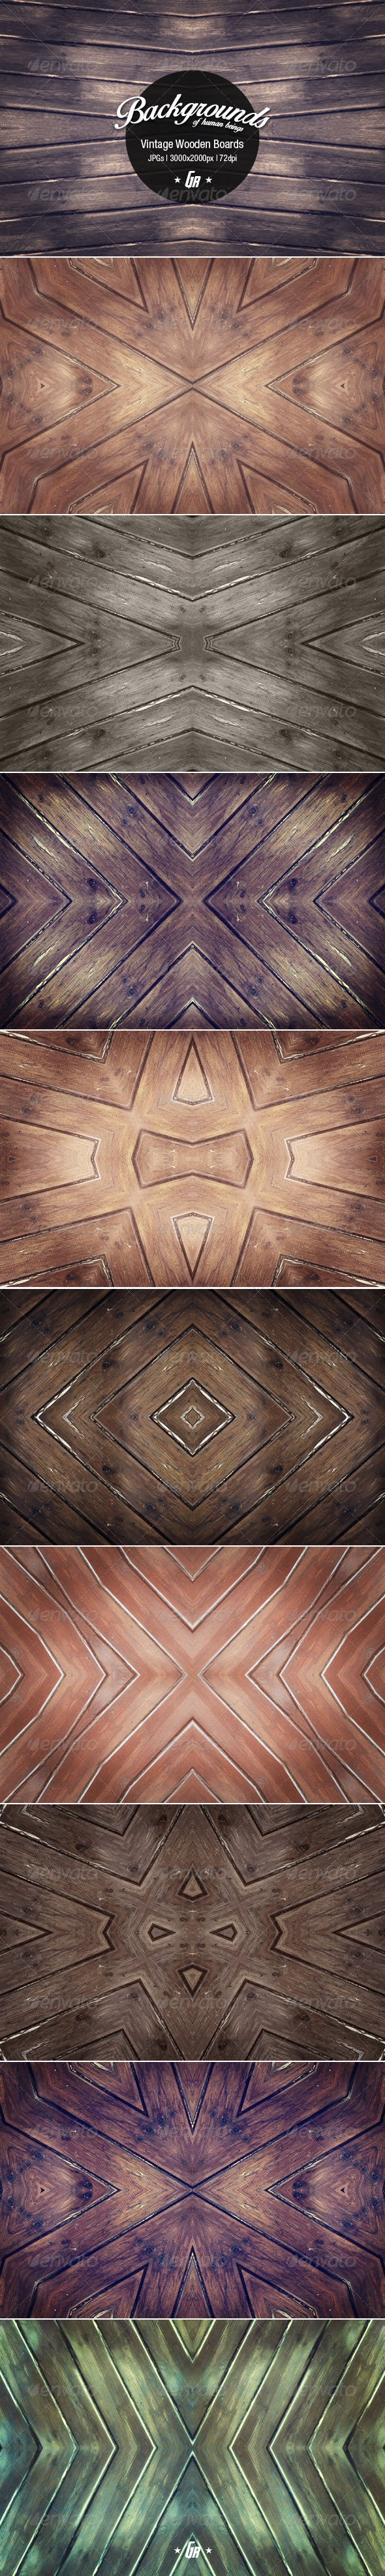 10 vintage wood backgrounds preview